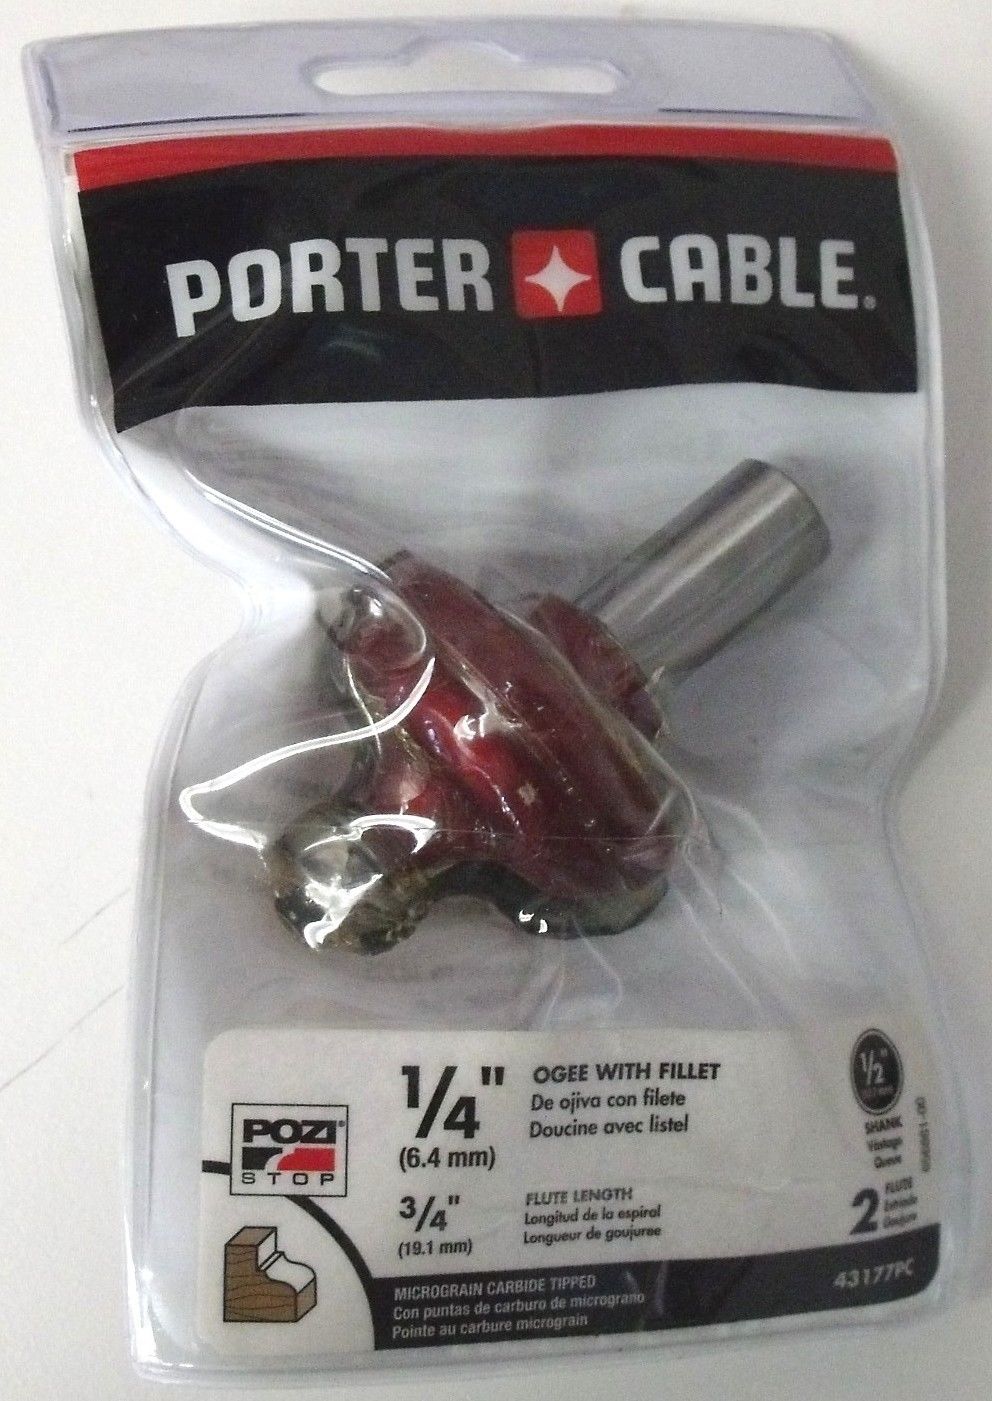 Porter Cable 43177PC 1/4" Ogee Router Bit with Fillet